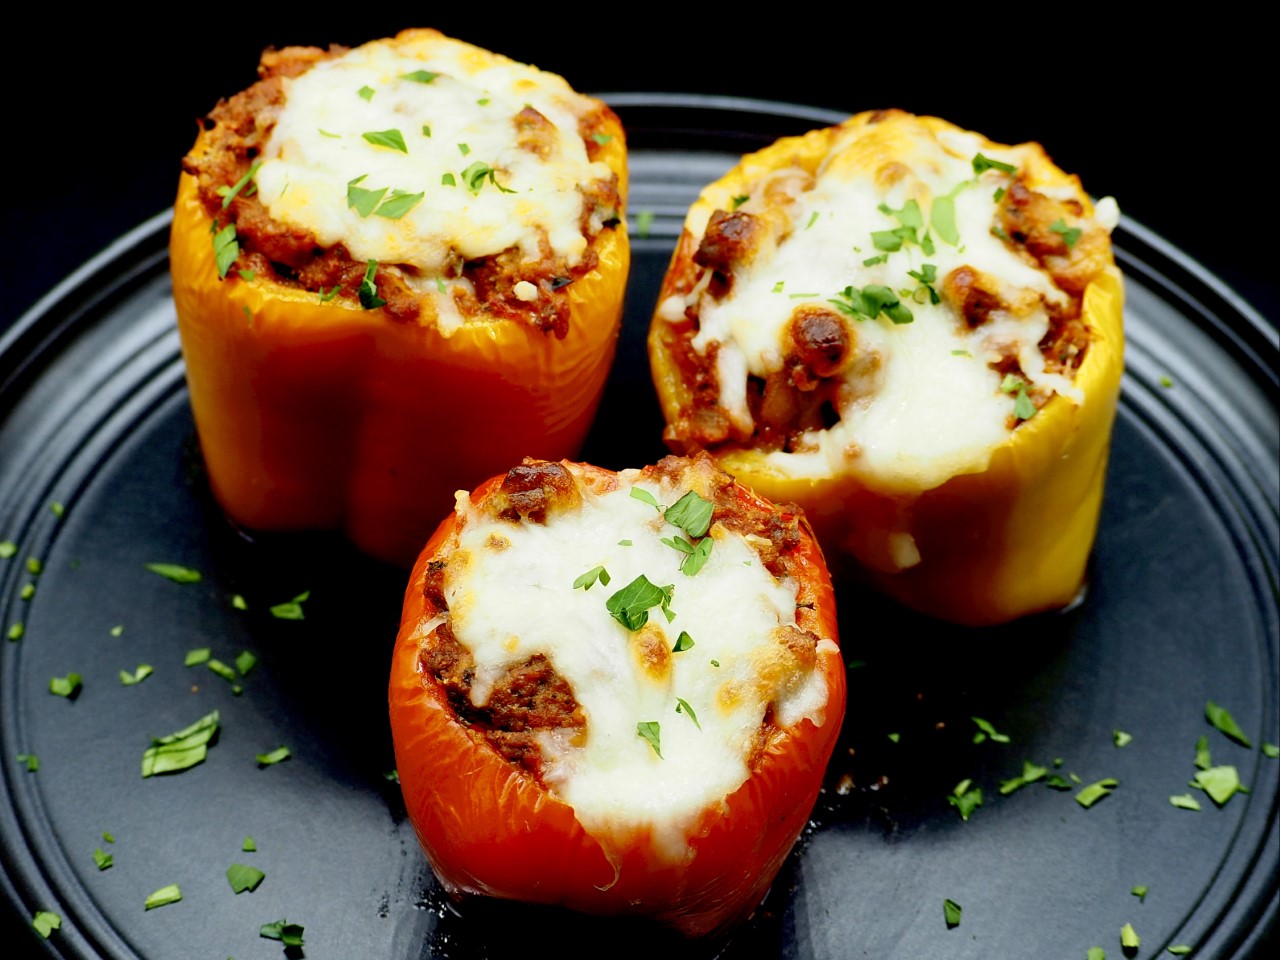 Stuffed peppers without tomato sauce recipe